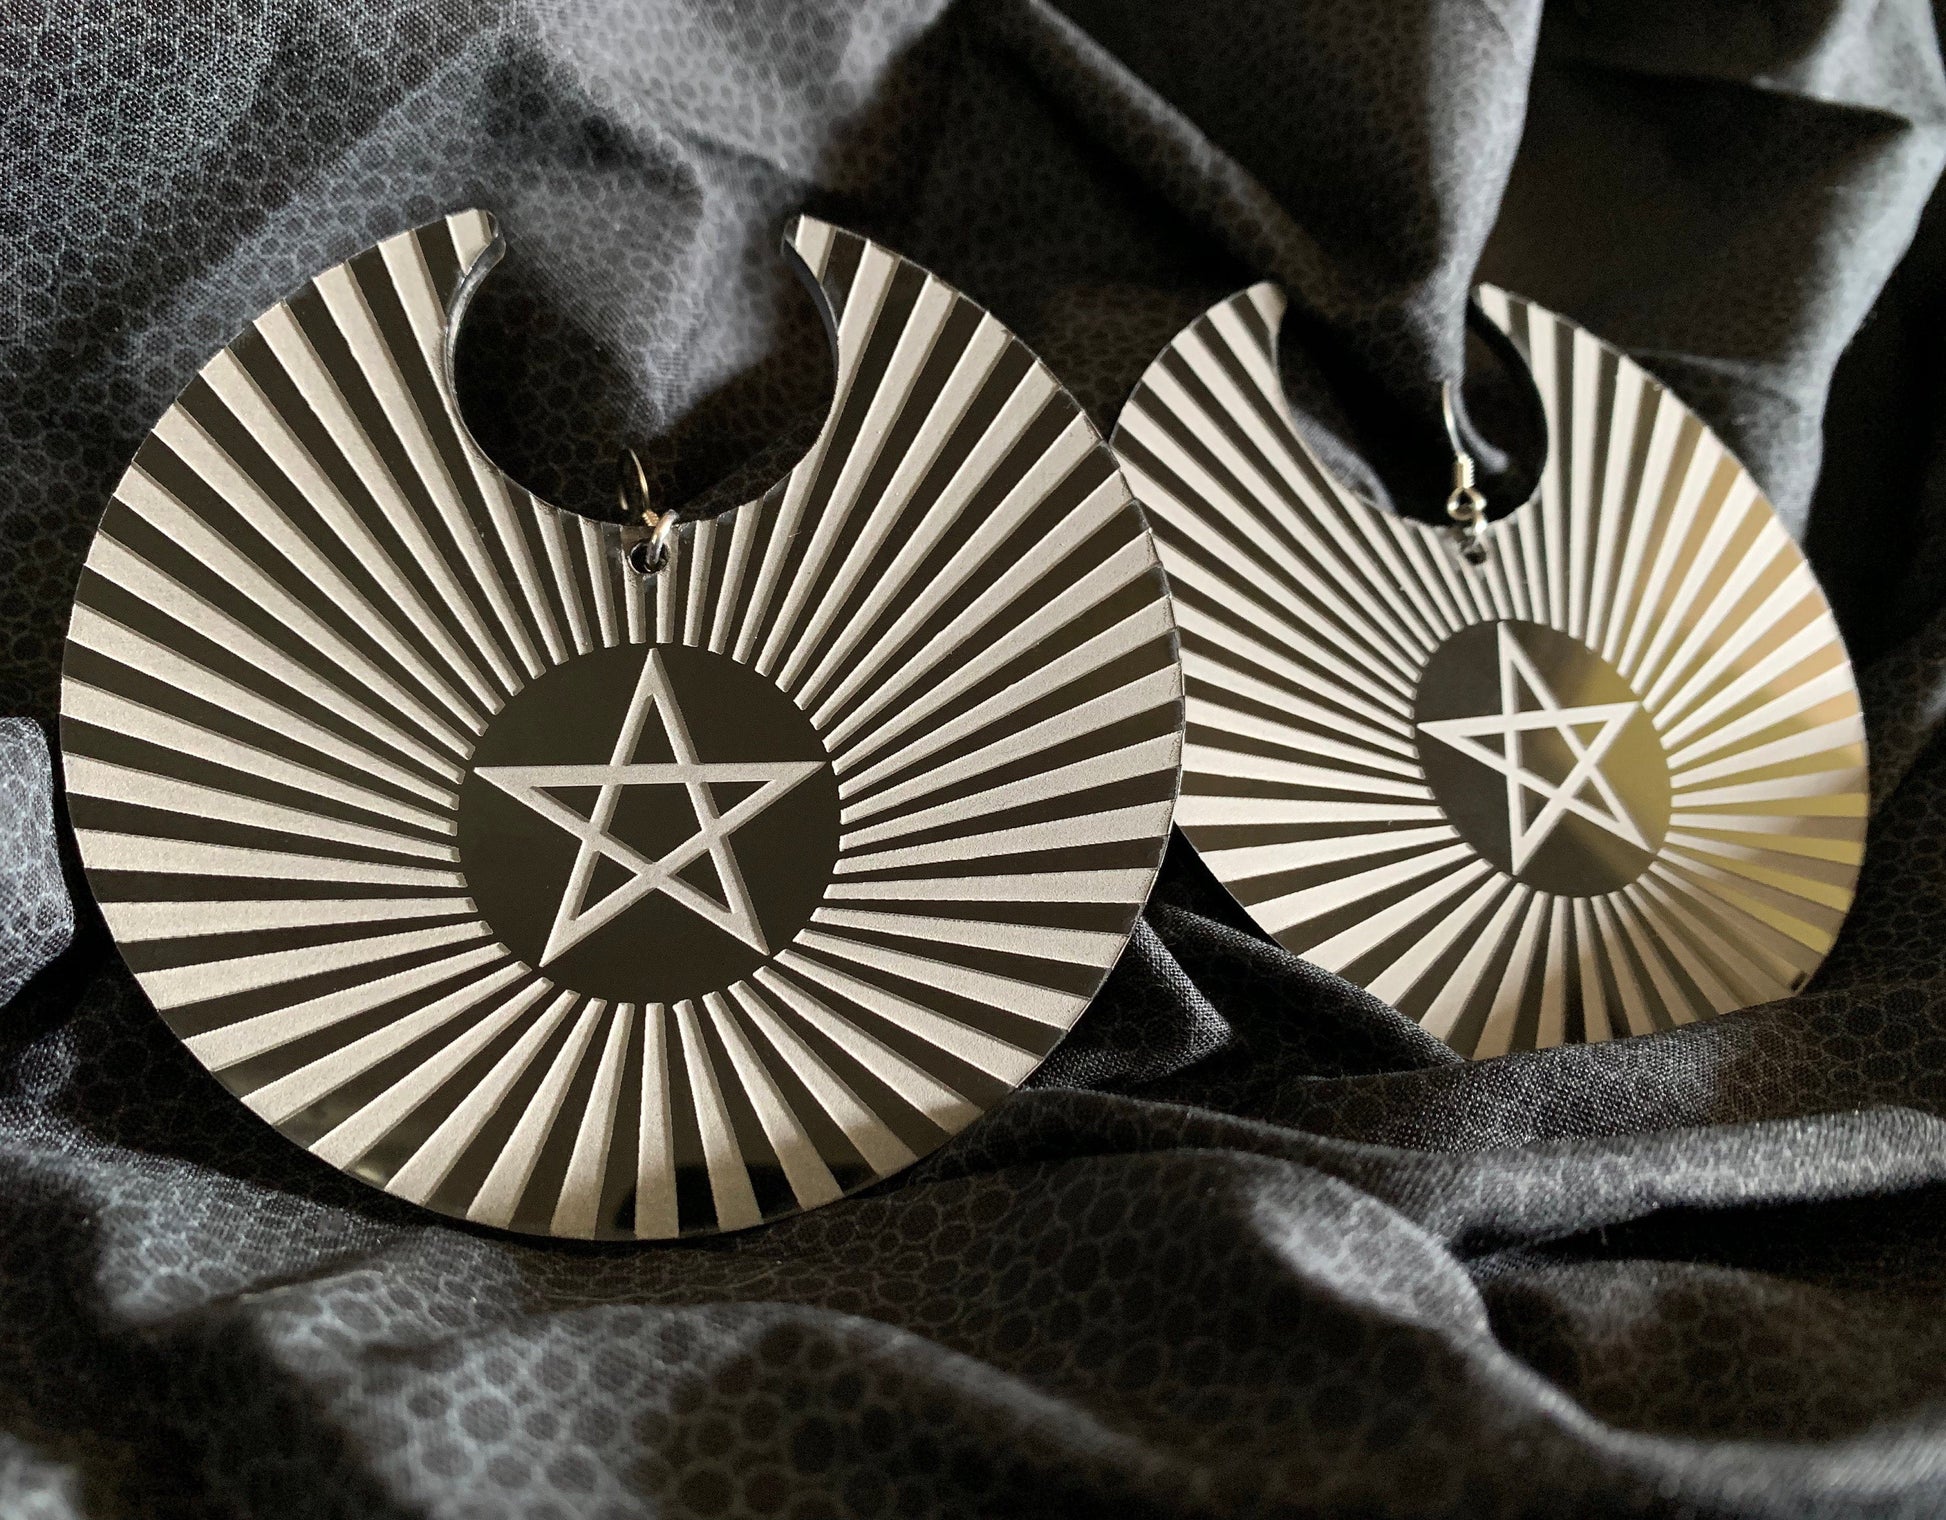 Round black and white acrylic earrings with a pentacle etched into the center surrounded by a sunbeam pattern filling the entirety of the earrings.